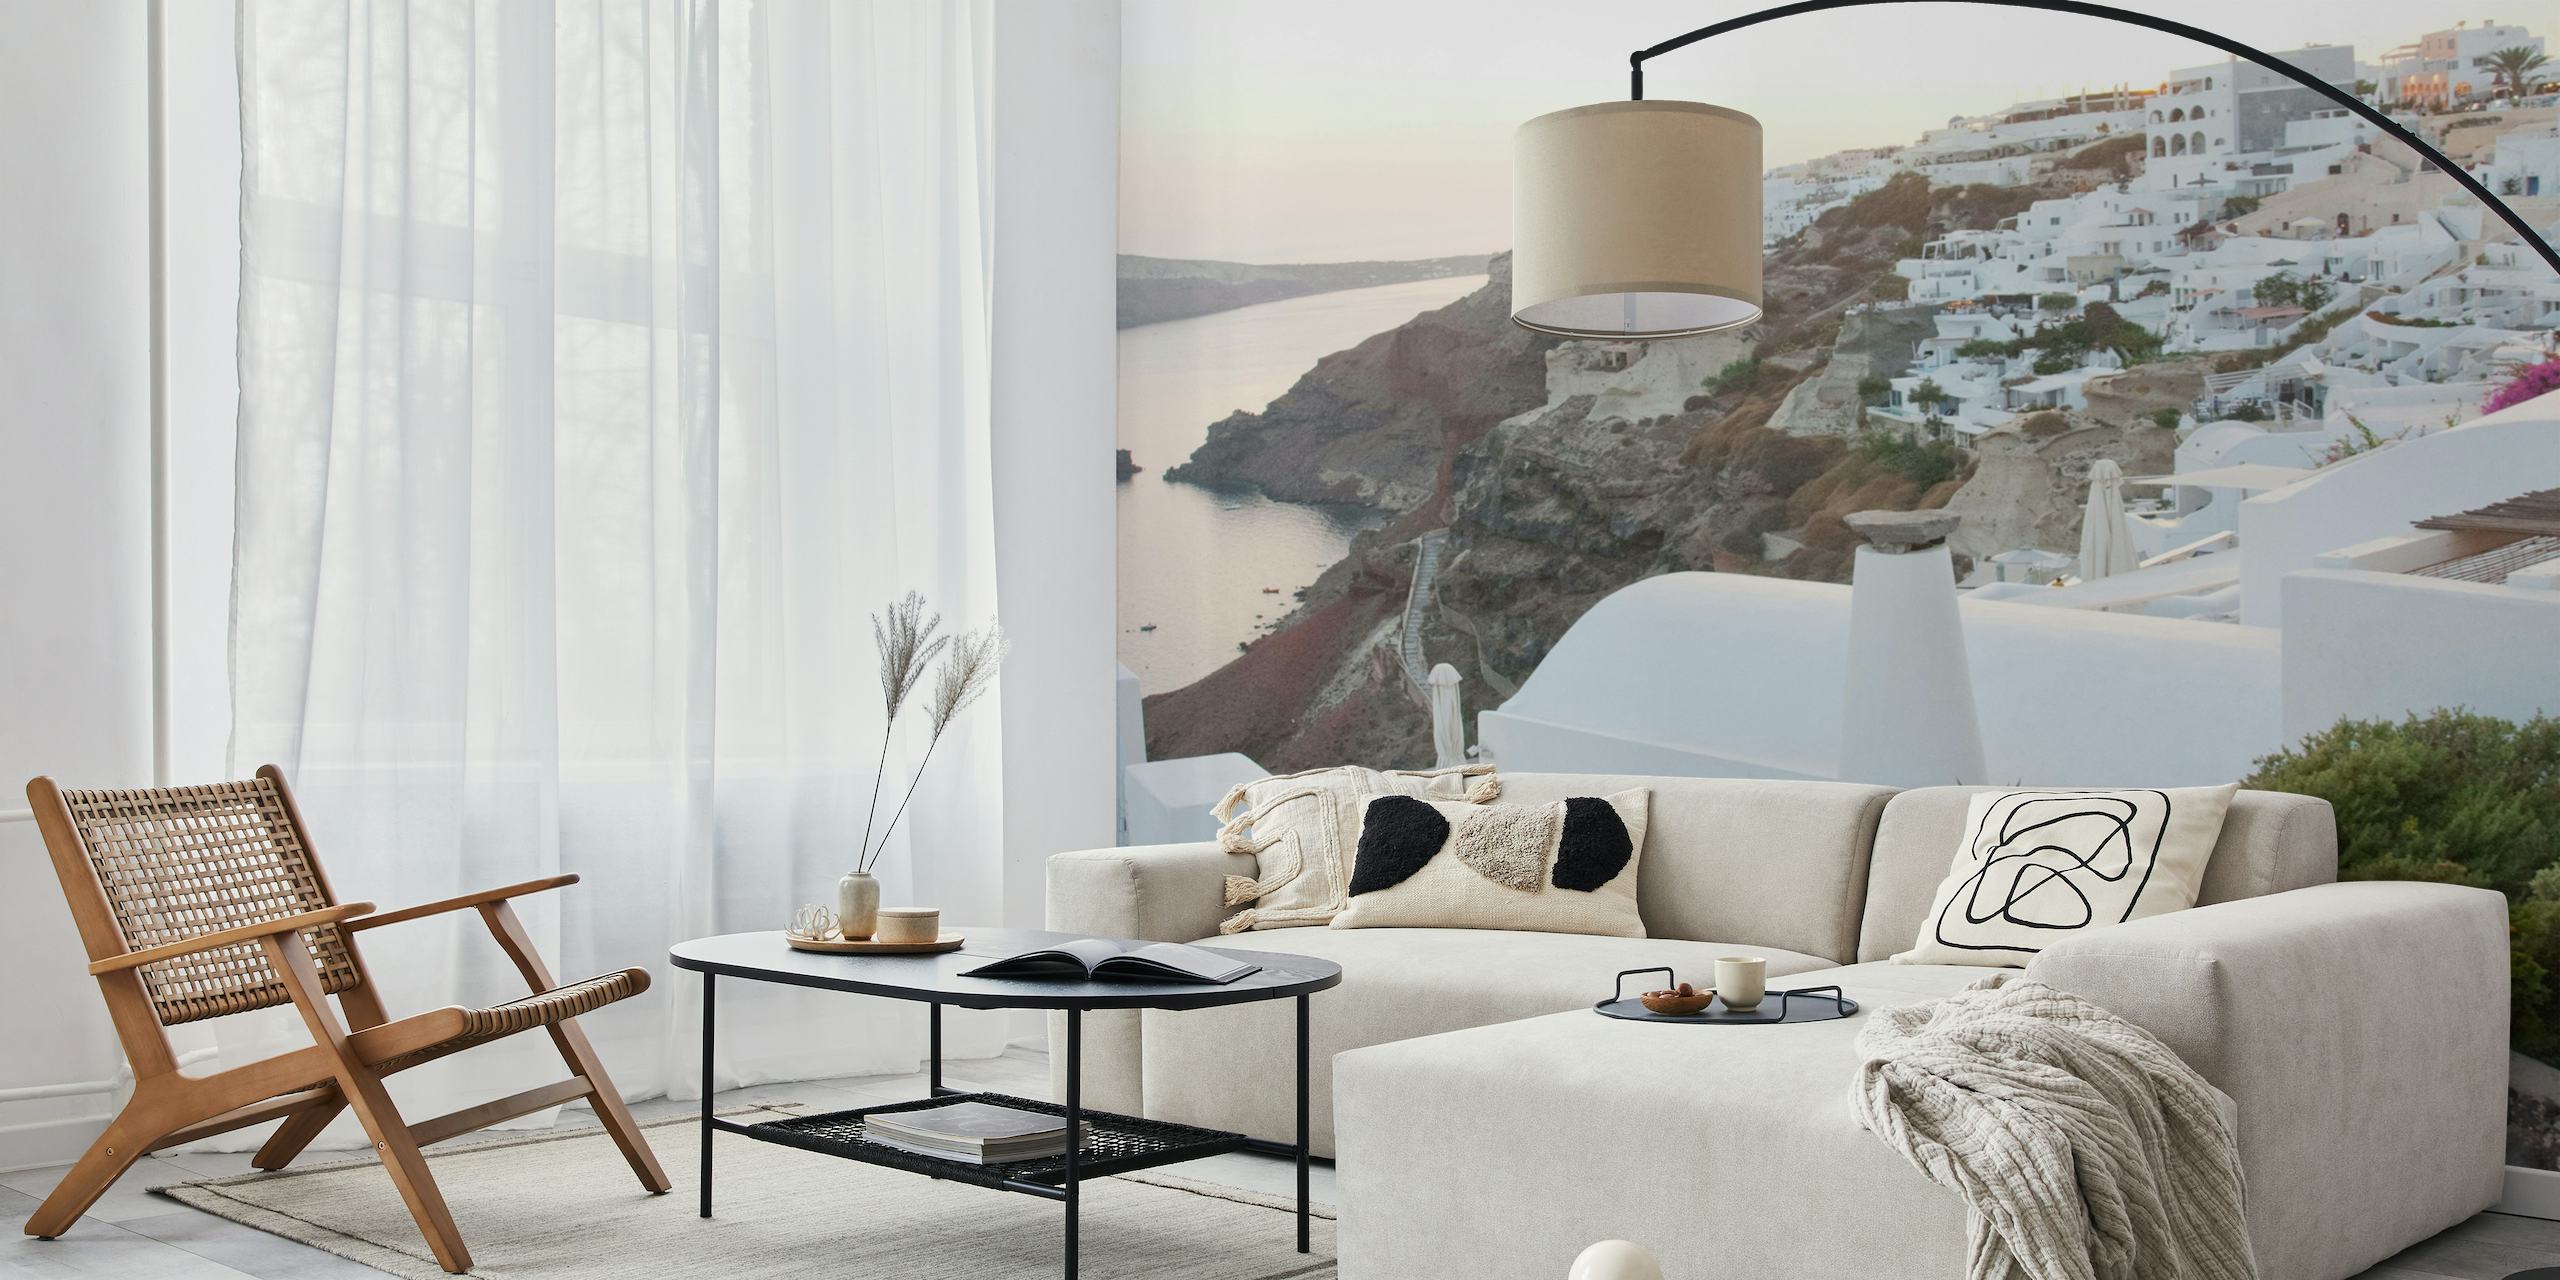 Santorini wall mural with white architecture and sunset